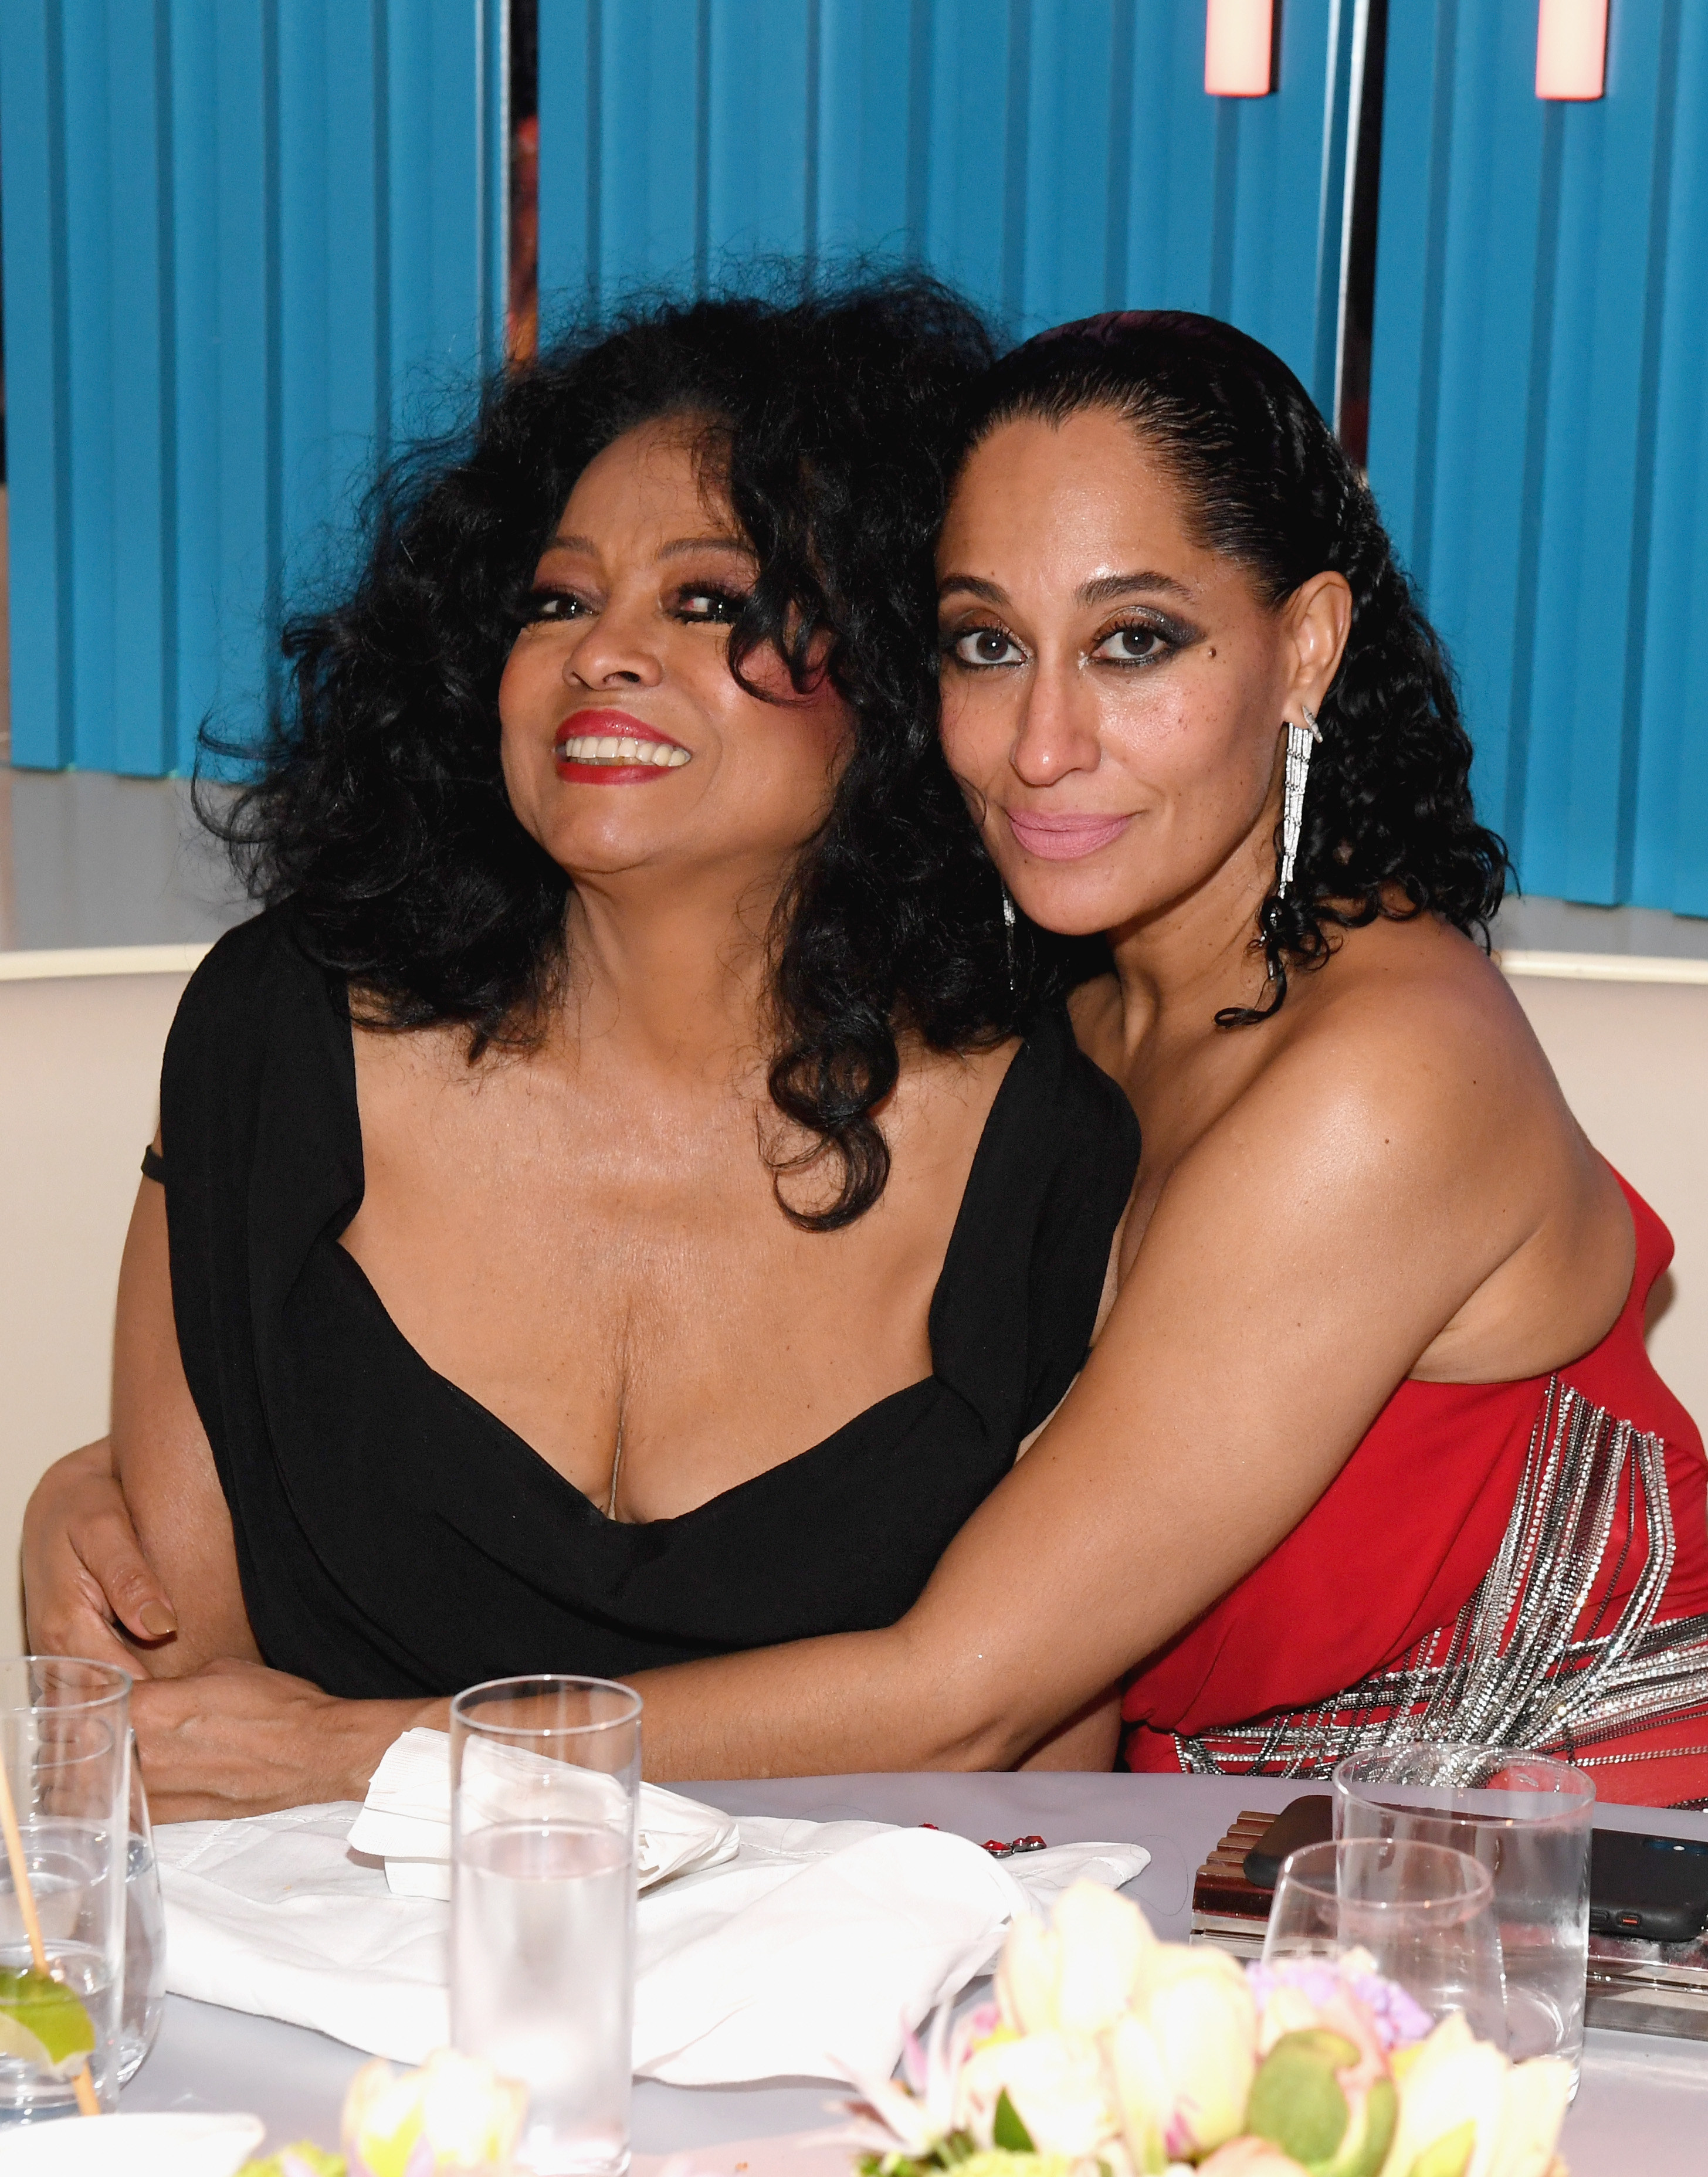 Tracee sitting with Diana and embracing her